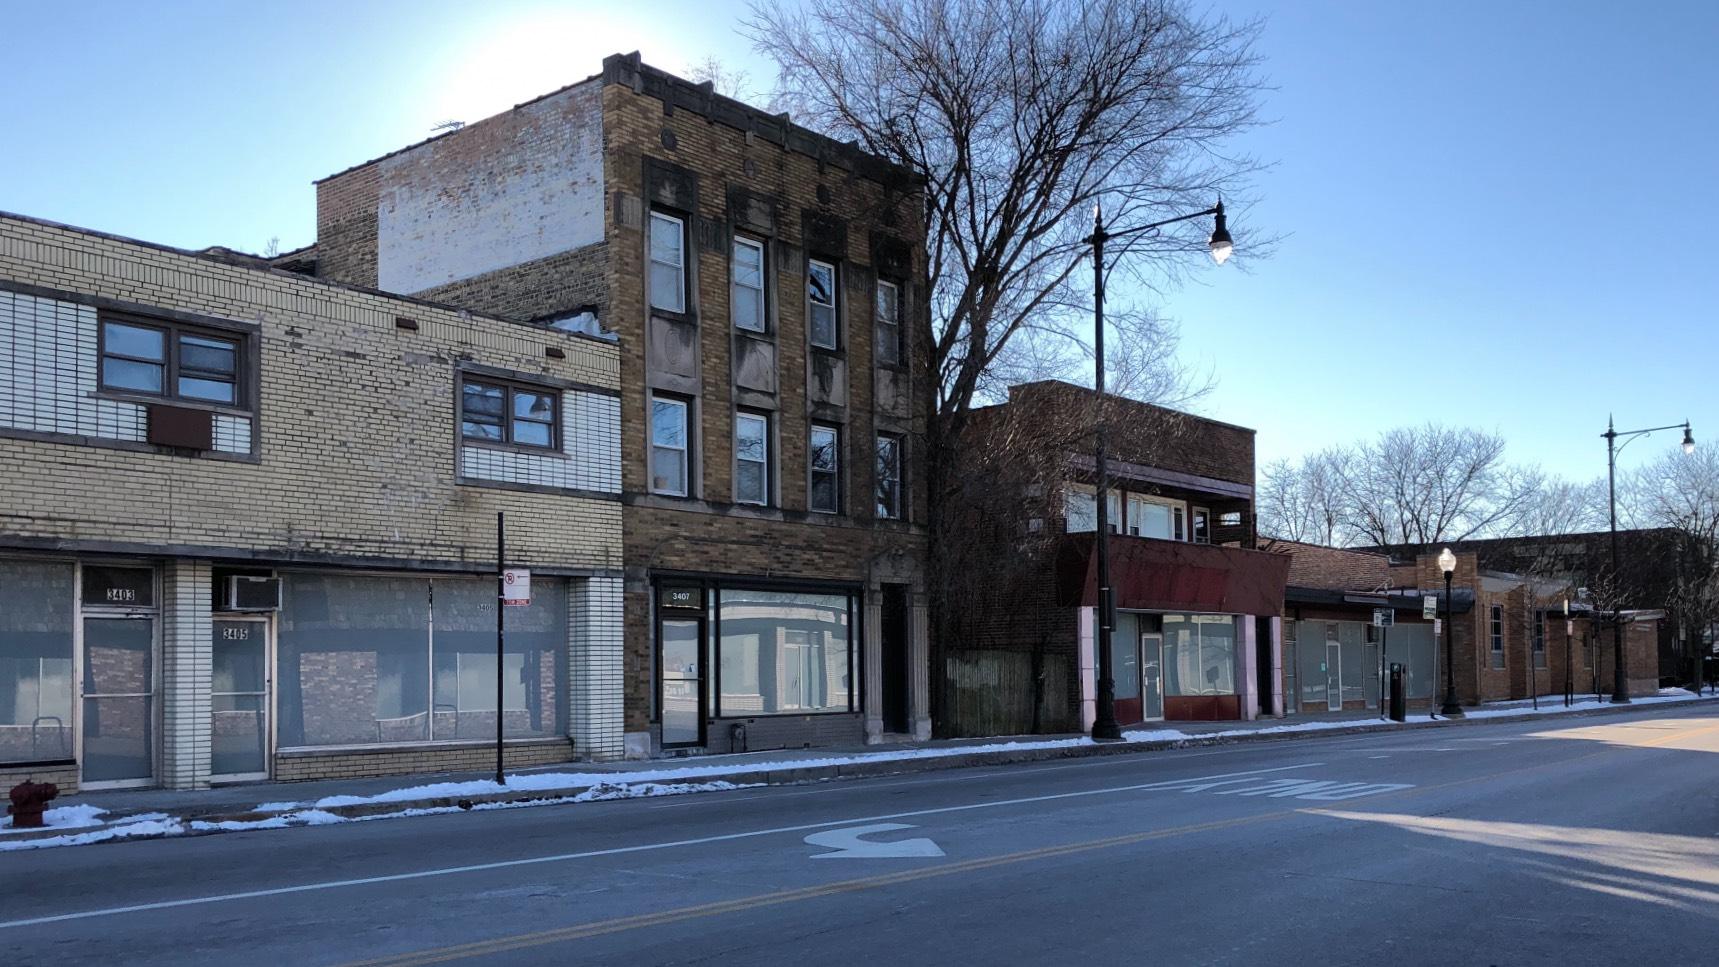 NEIU invoked eminent domain to acquire a block of buildings on Bryn Mawr. (Patty Wetli / WTTW News)